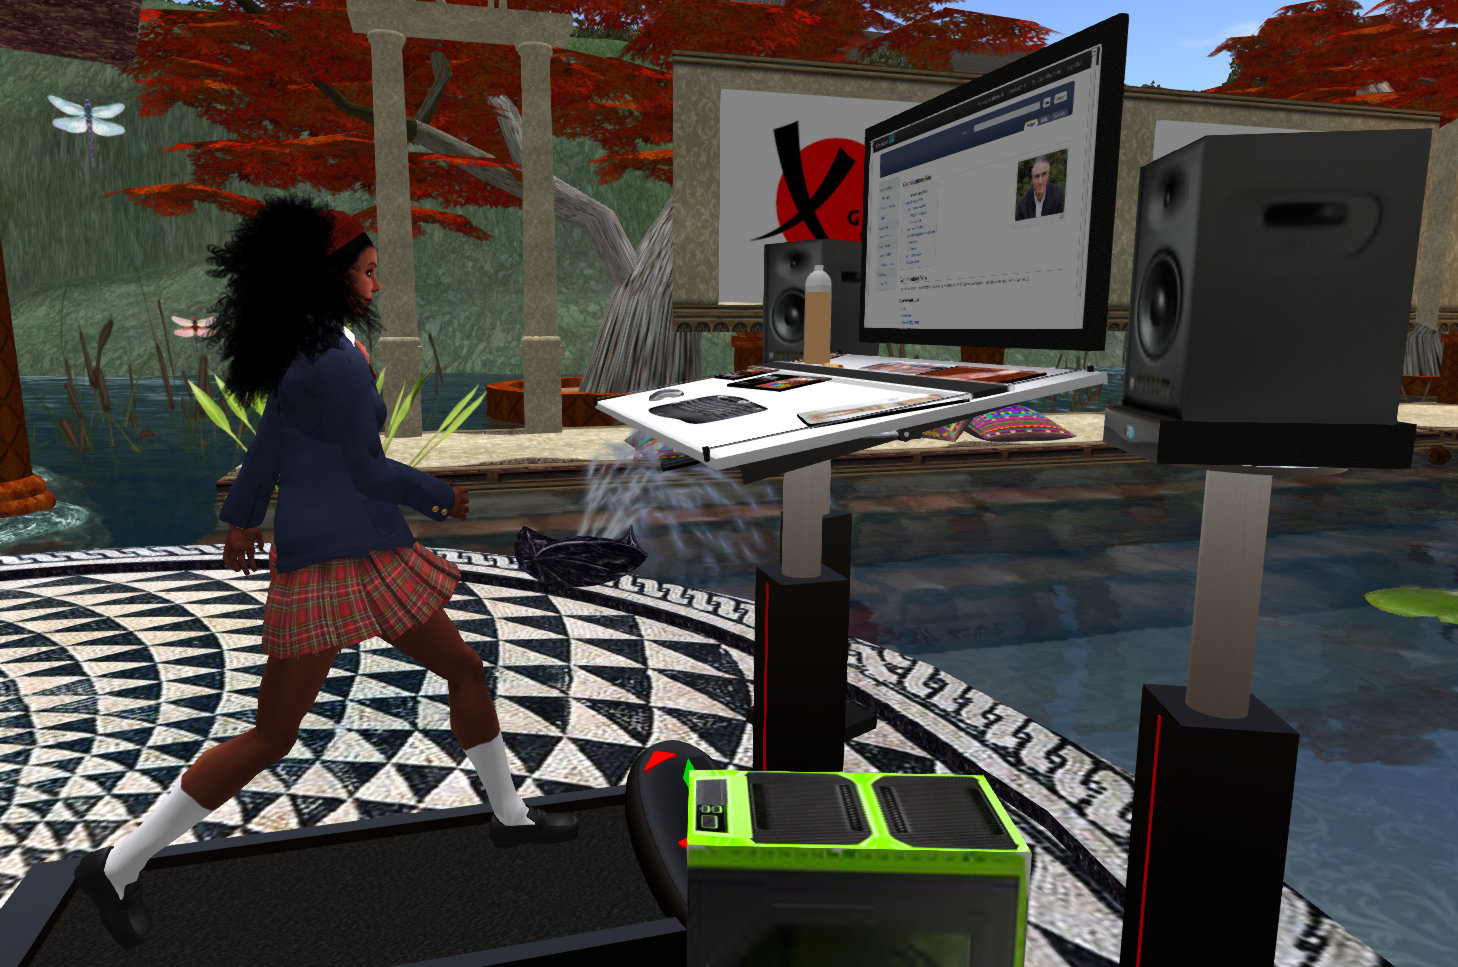 Student Diversity: ScreenCap of Vaneeesa Blaylock walking on her "treadmill desk" in the VB28 Roman Villa while watching Gamification lectures by Kevin Werbach